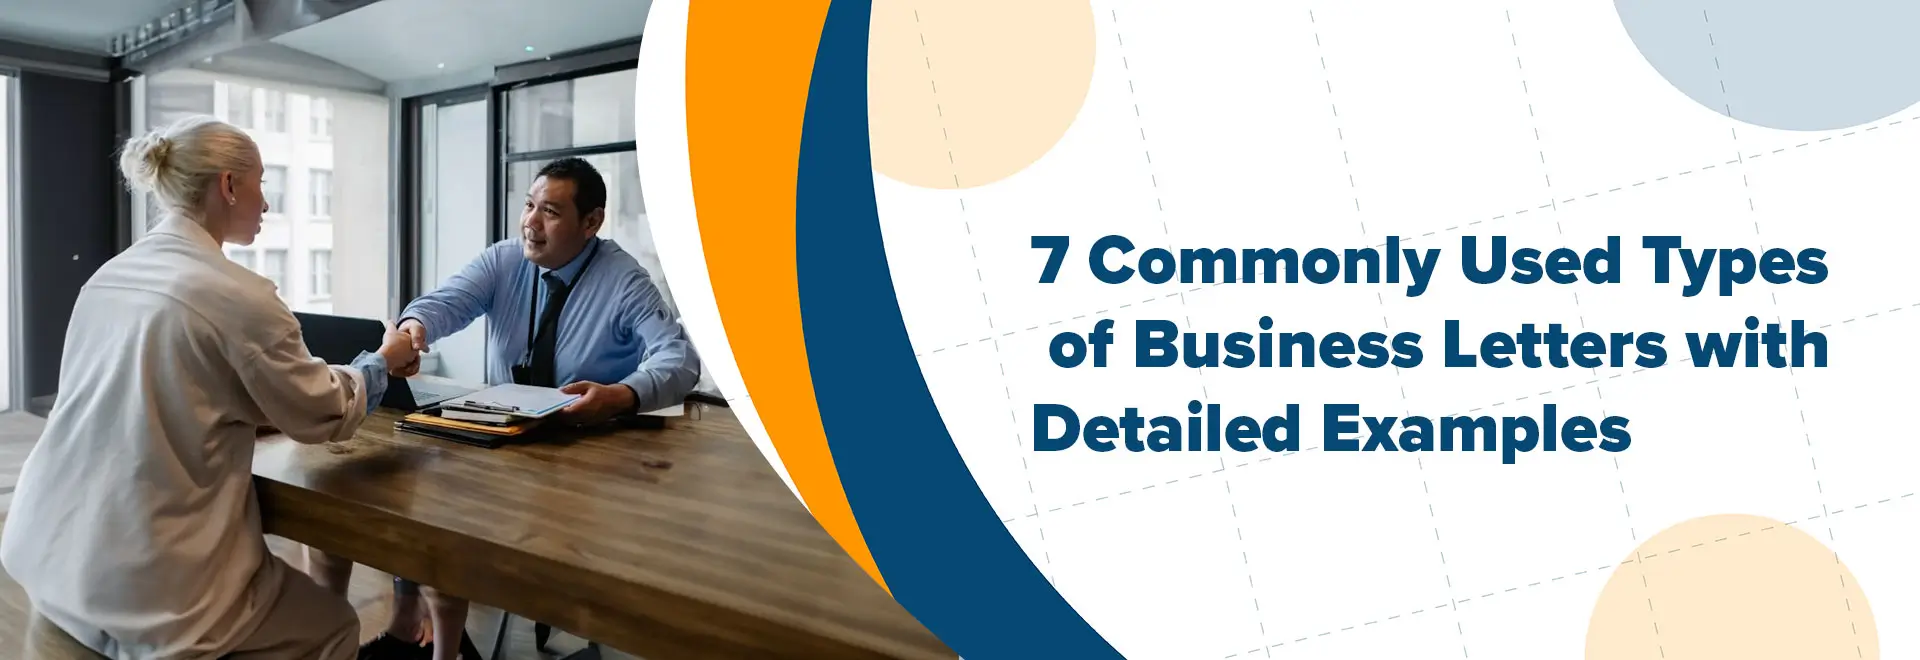 7 Commonly Used Types of Business Letters with Detailed Examples